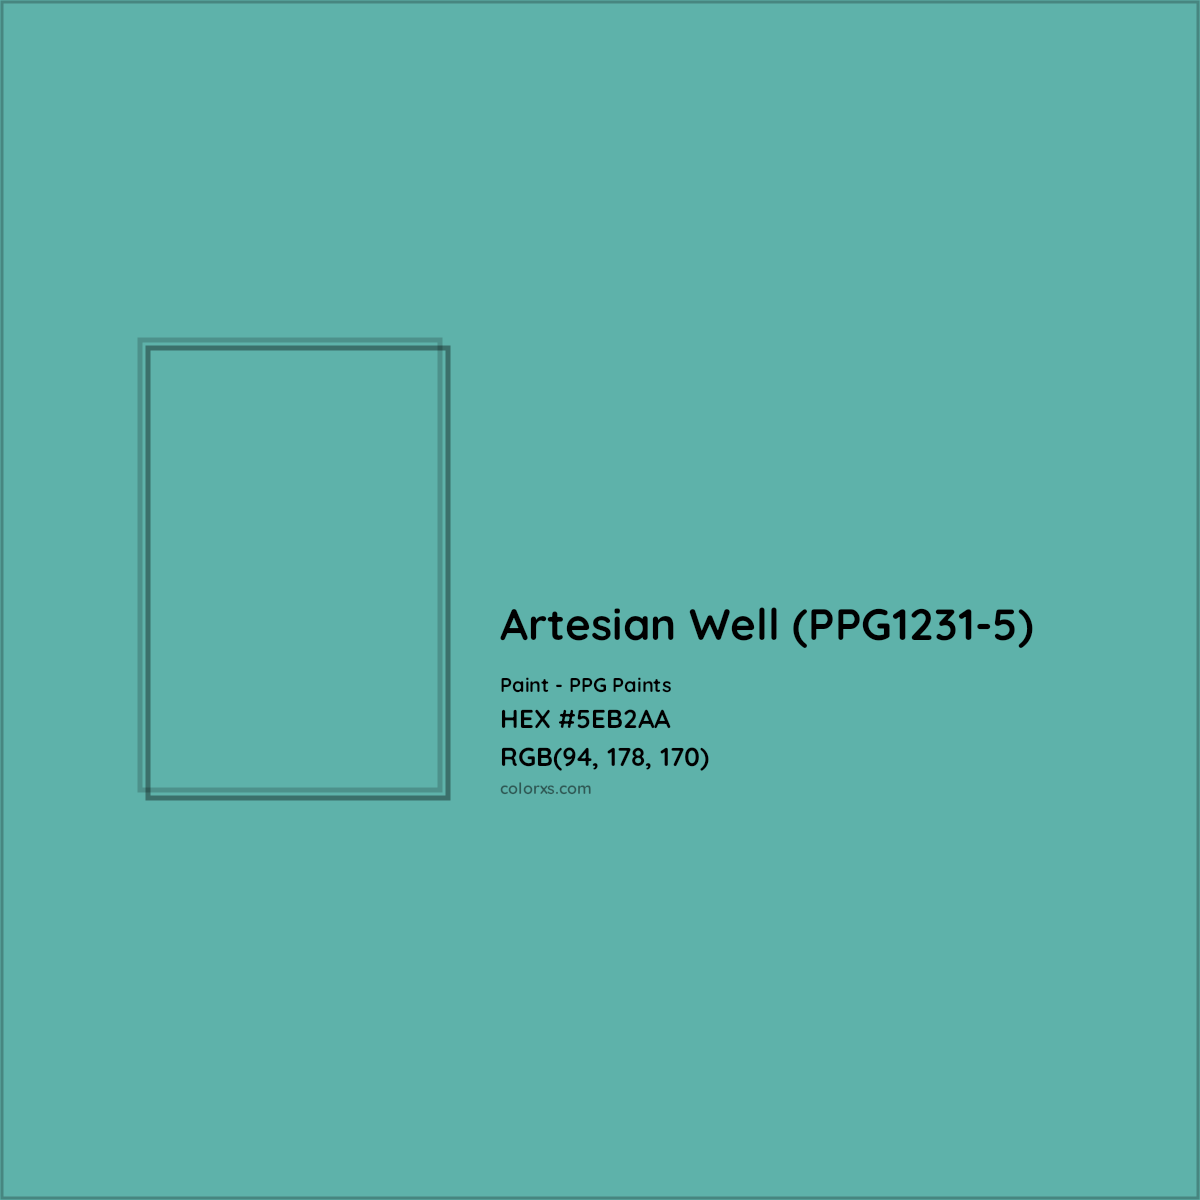 HEX #5EB2AA Artesian Well (PPG1231-5) Paint PPG Paints - Color Code